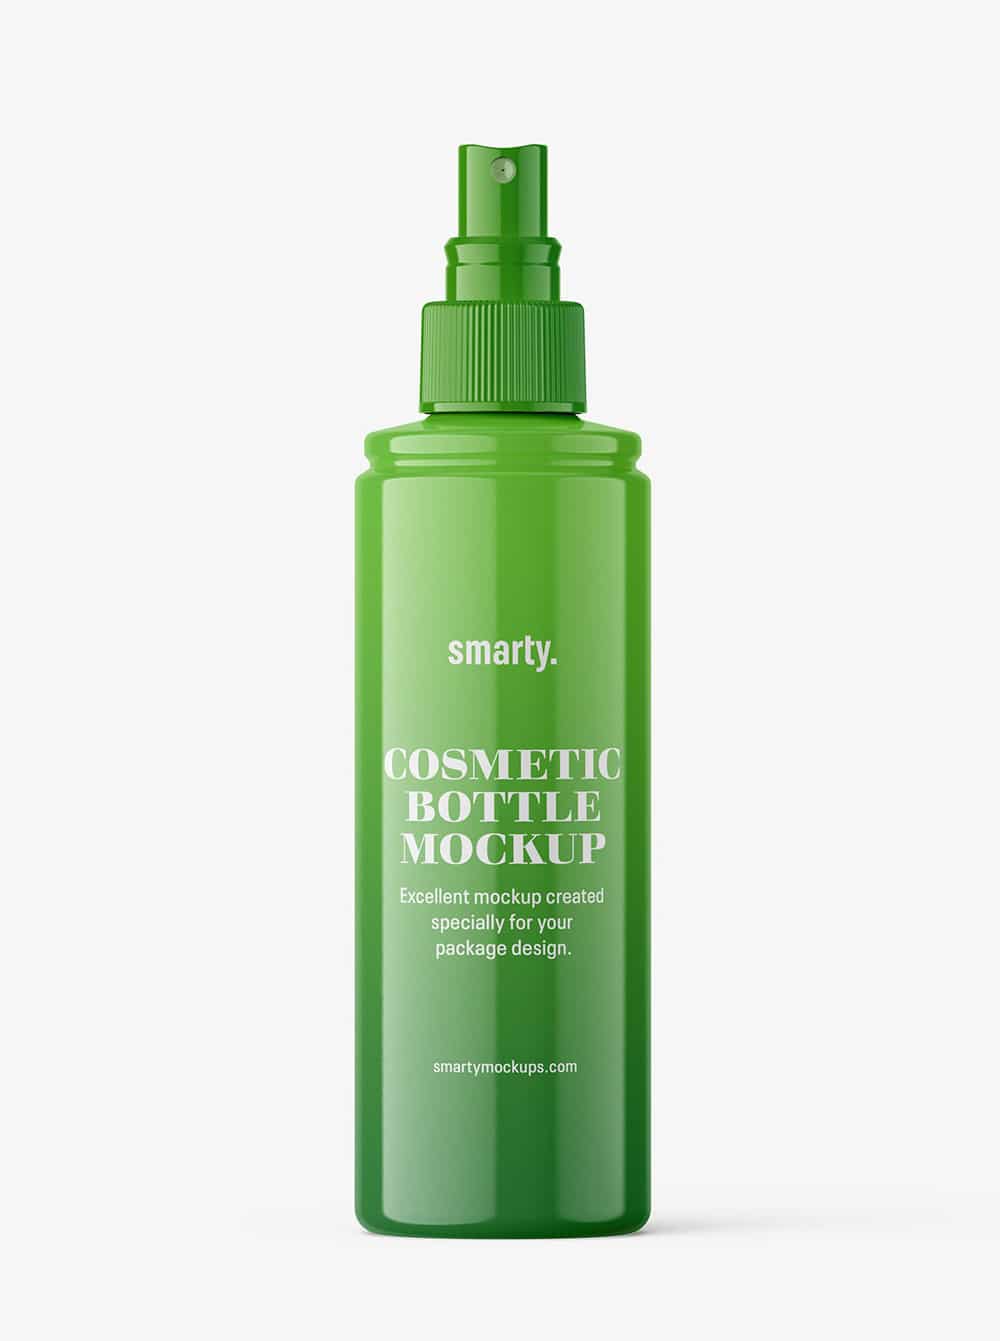 Glossy Bottle With Spray Cap Mockup